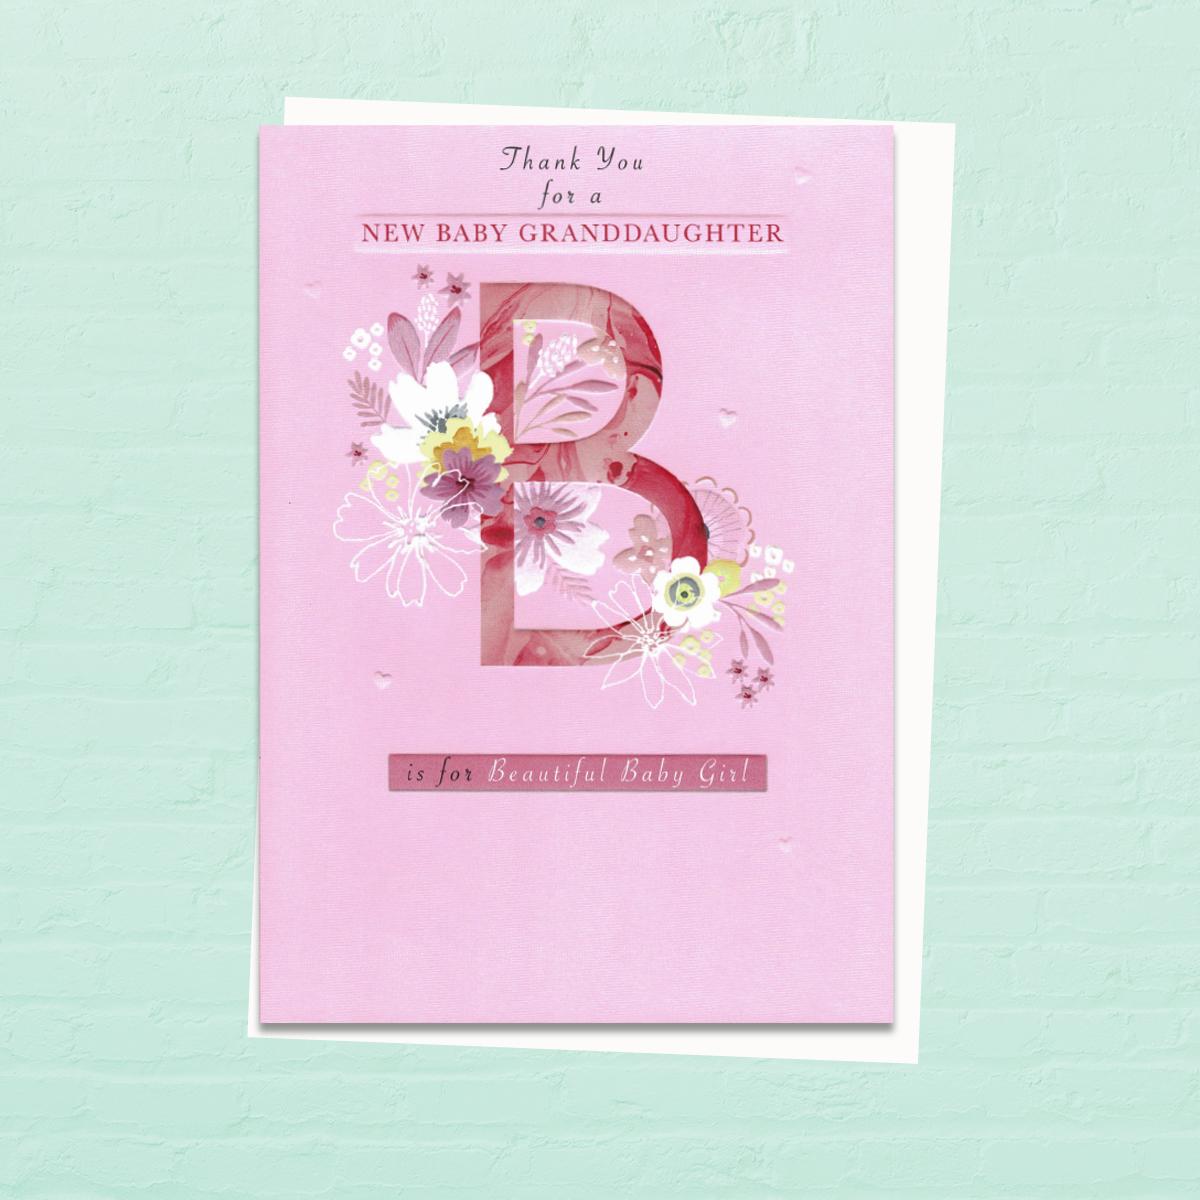 'Thank You For A New Baby Granddaughter. B Is For Beautiful Baby Girl' Card. Features The Letter 'B' Decorated with florals.